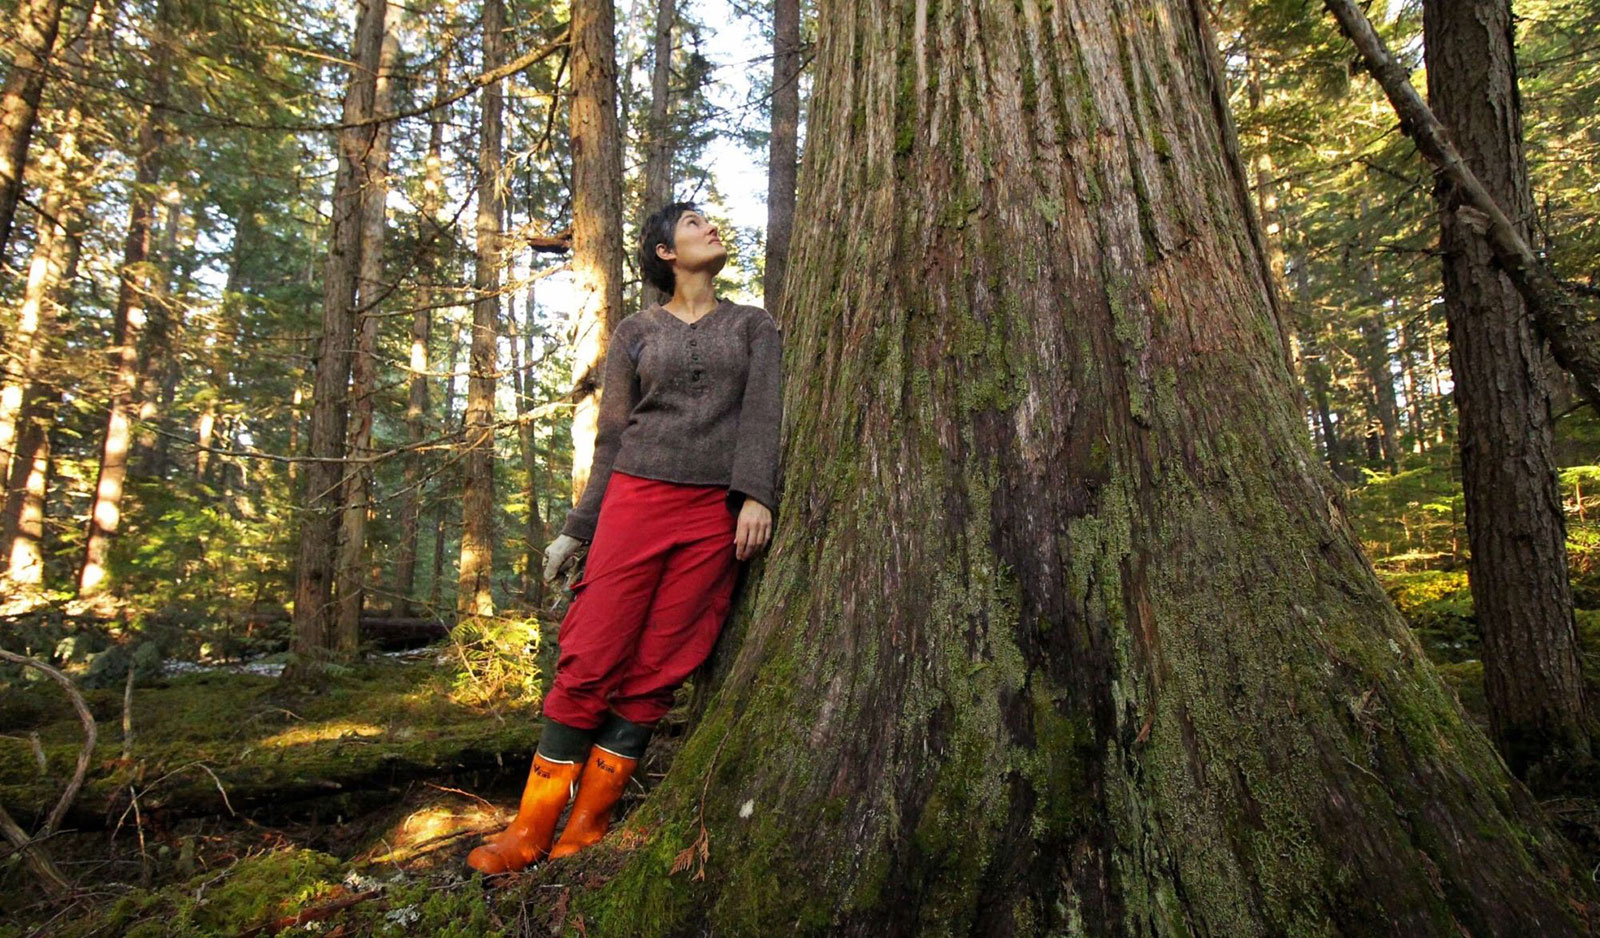 A woman with short, dark hair leans against a large tree trunk in a forest and looks up.